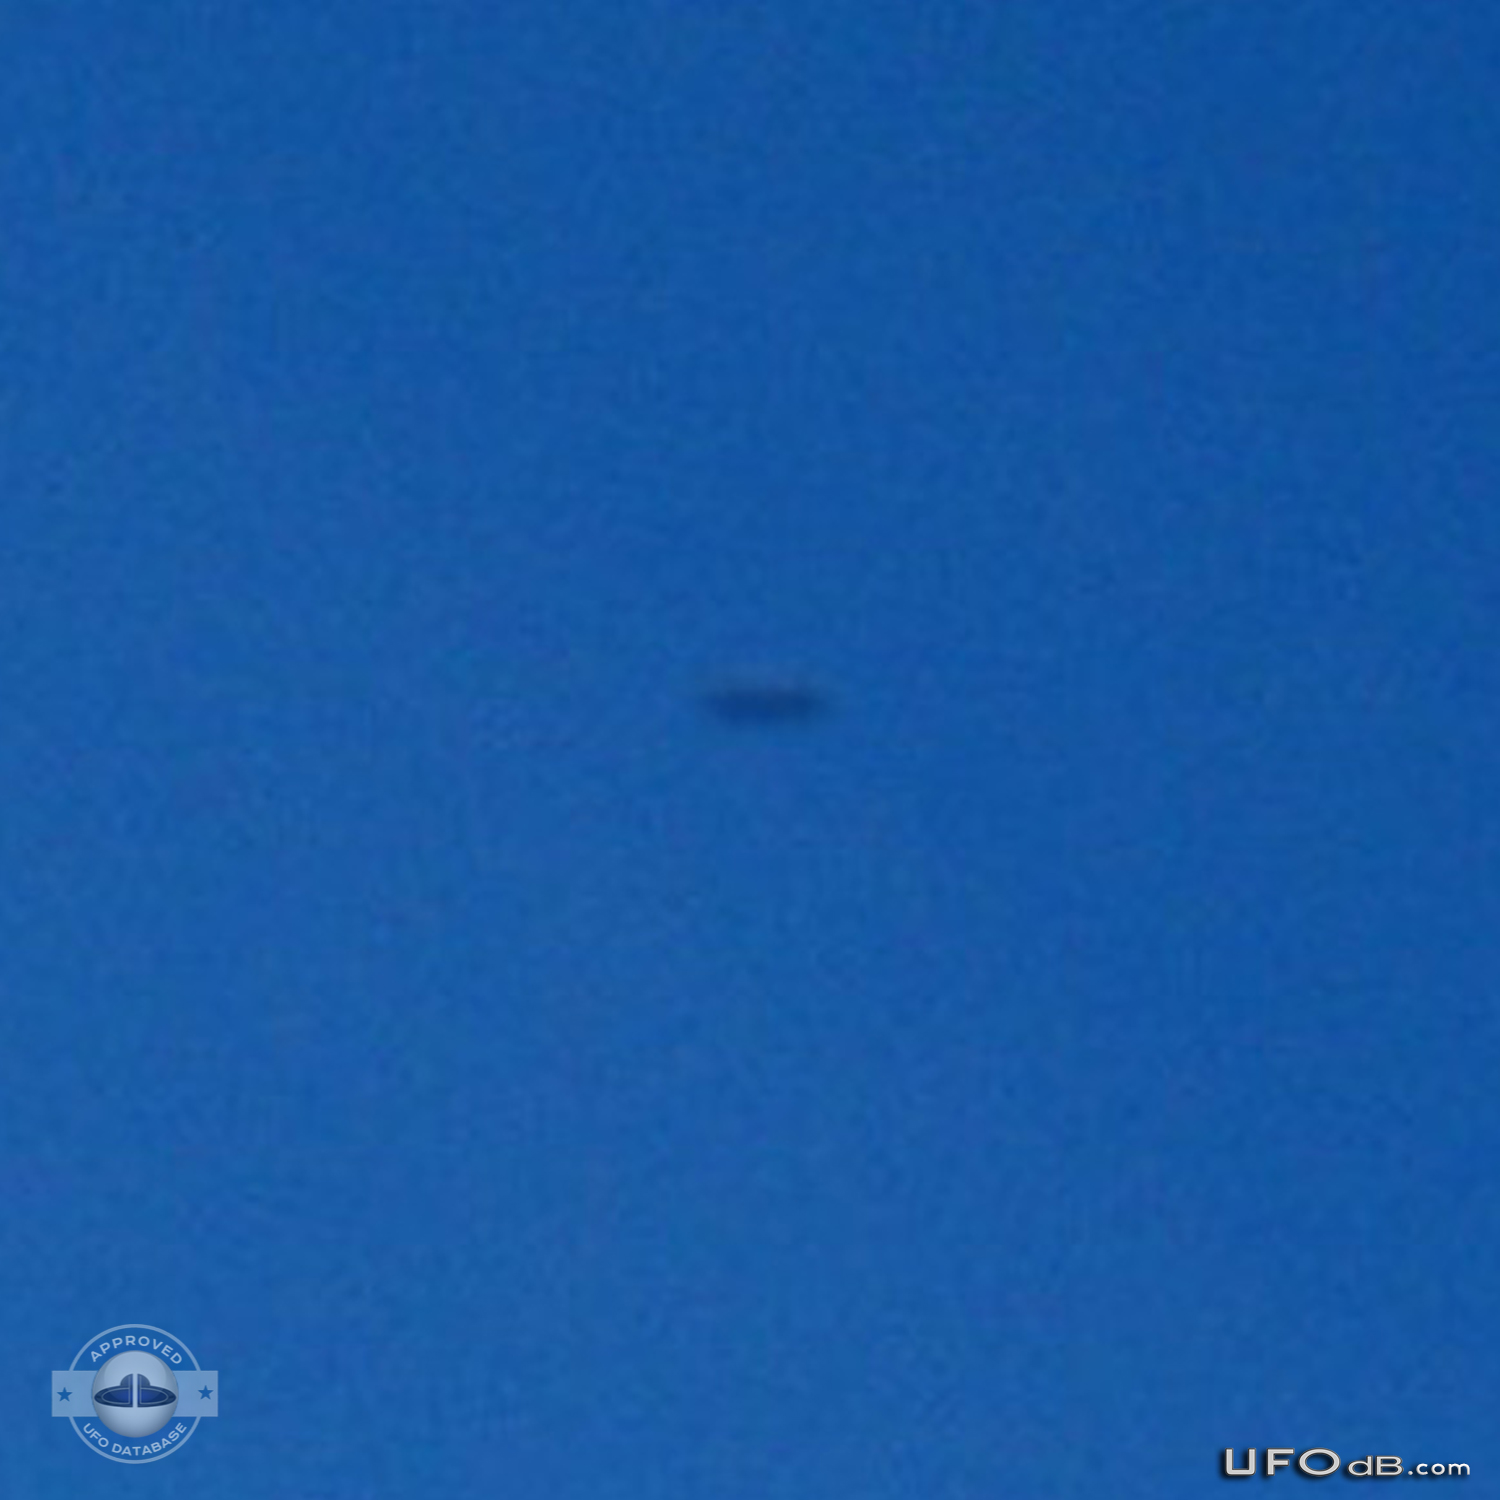 Classic Saucer UFO over West Sussex in England | U.K. February 17 2011 UFO Picture #265-2